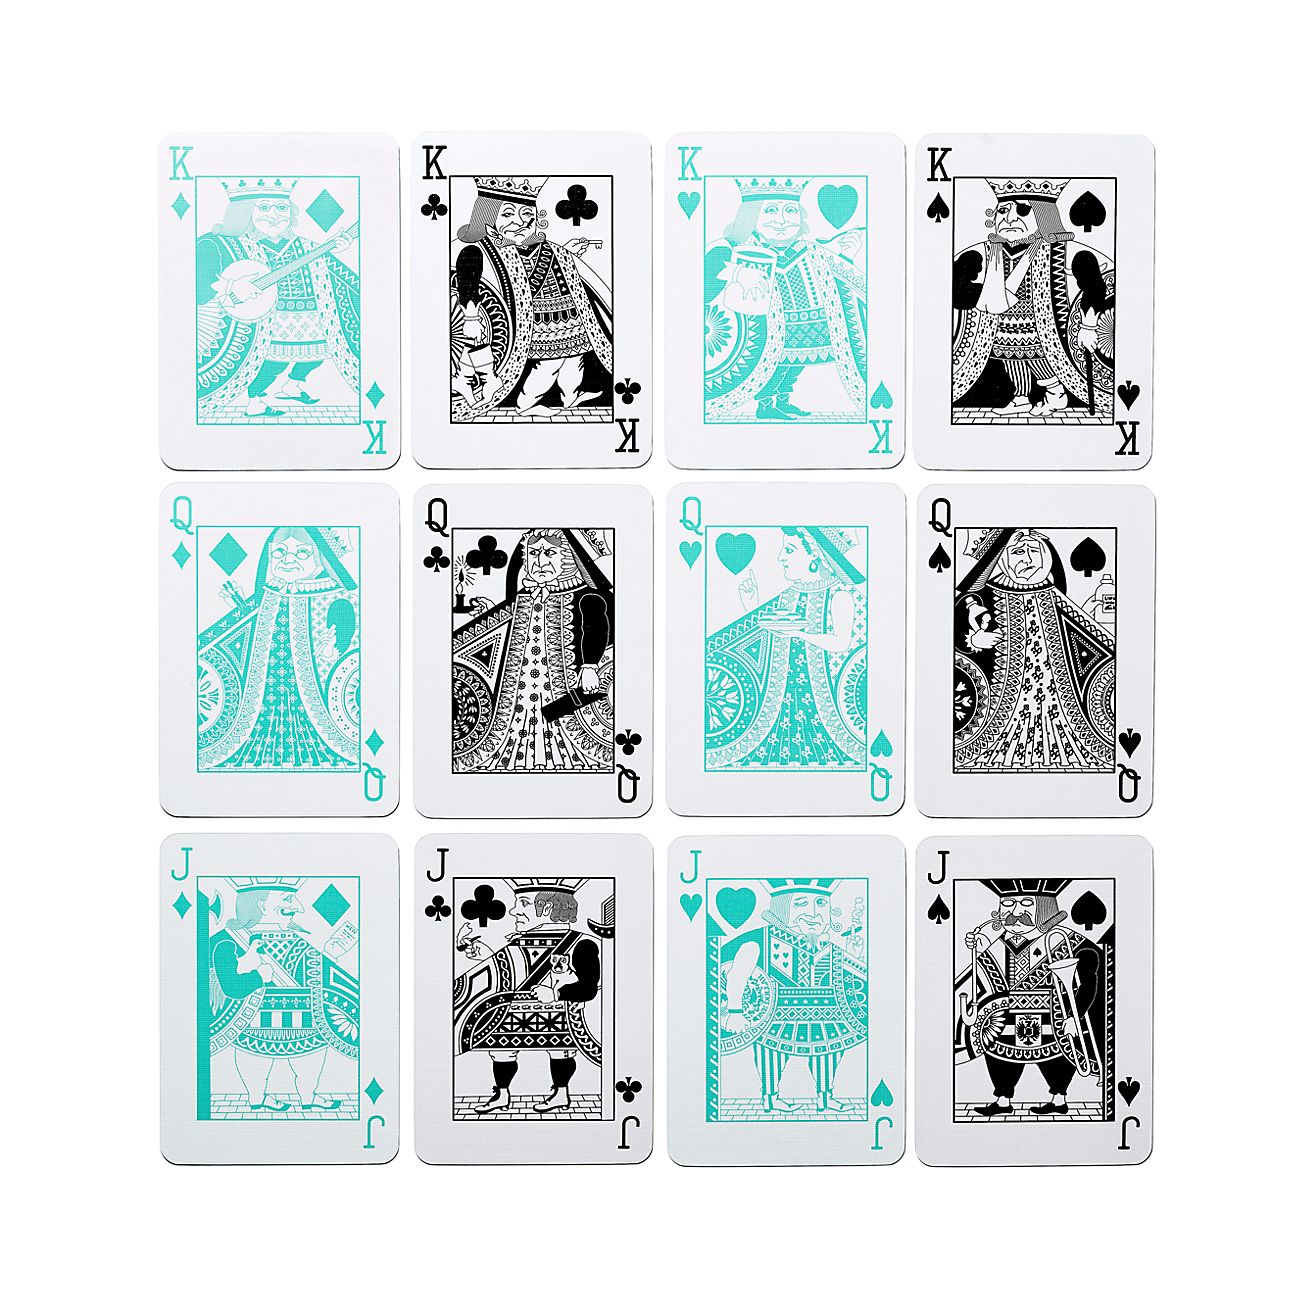 tiffany's playing cards